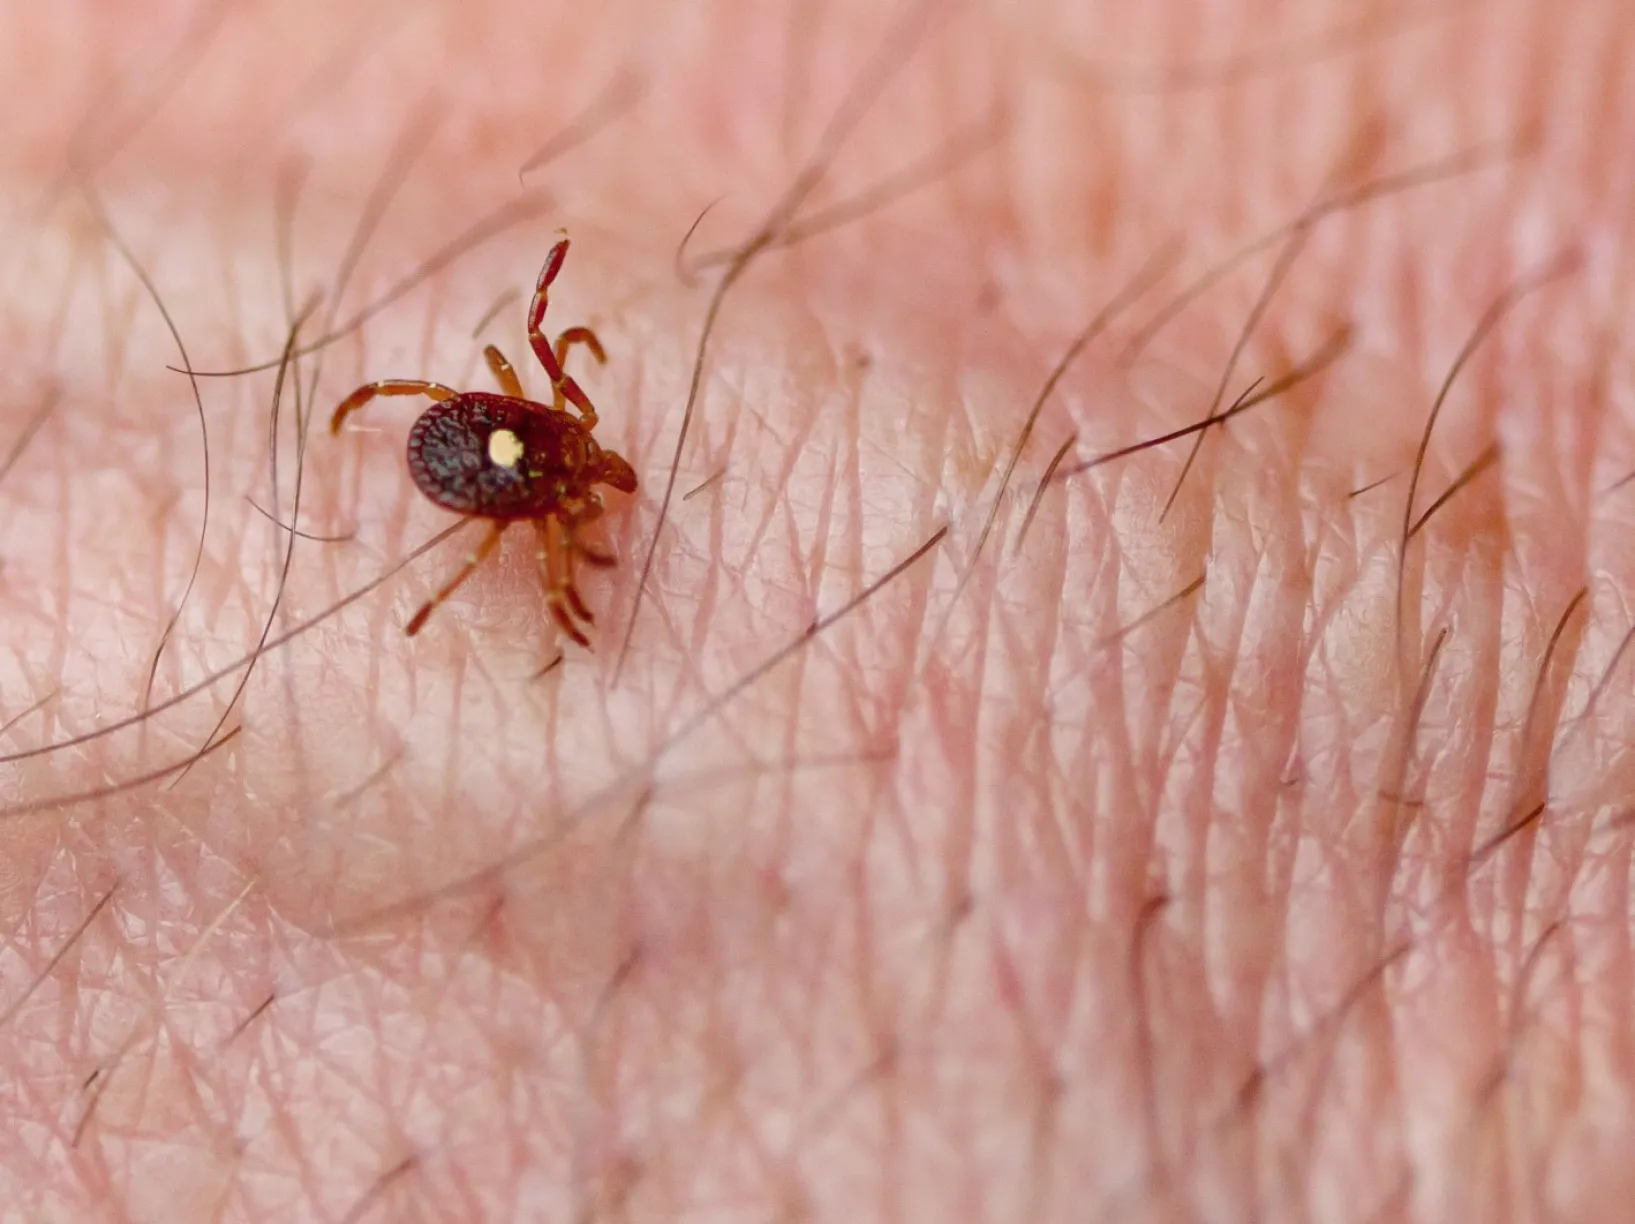 Human monocytic ehrlichiosis is caused by the bite of infected ticks, including the lone star tick (Amblyomma americanum).